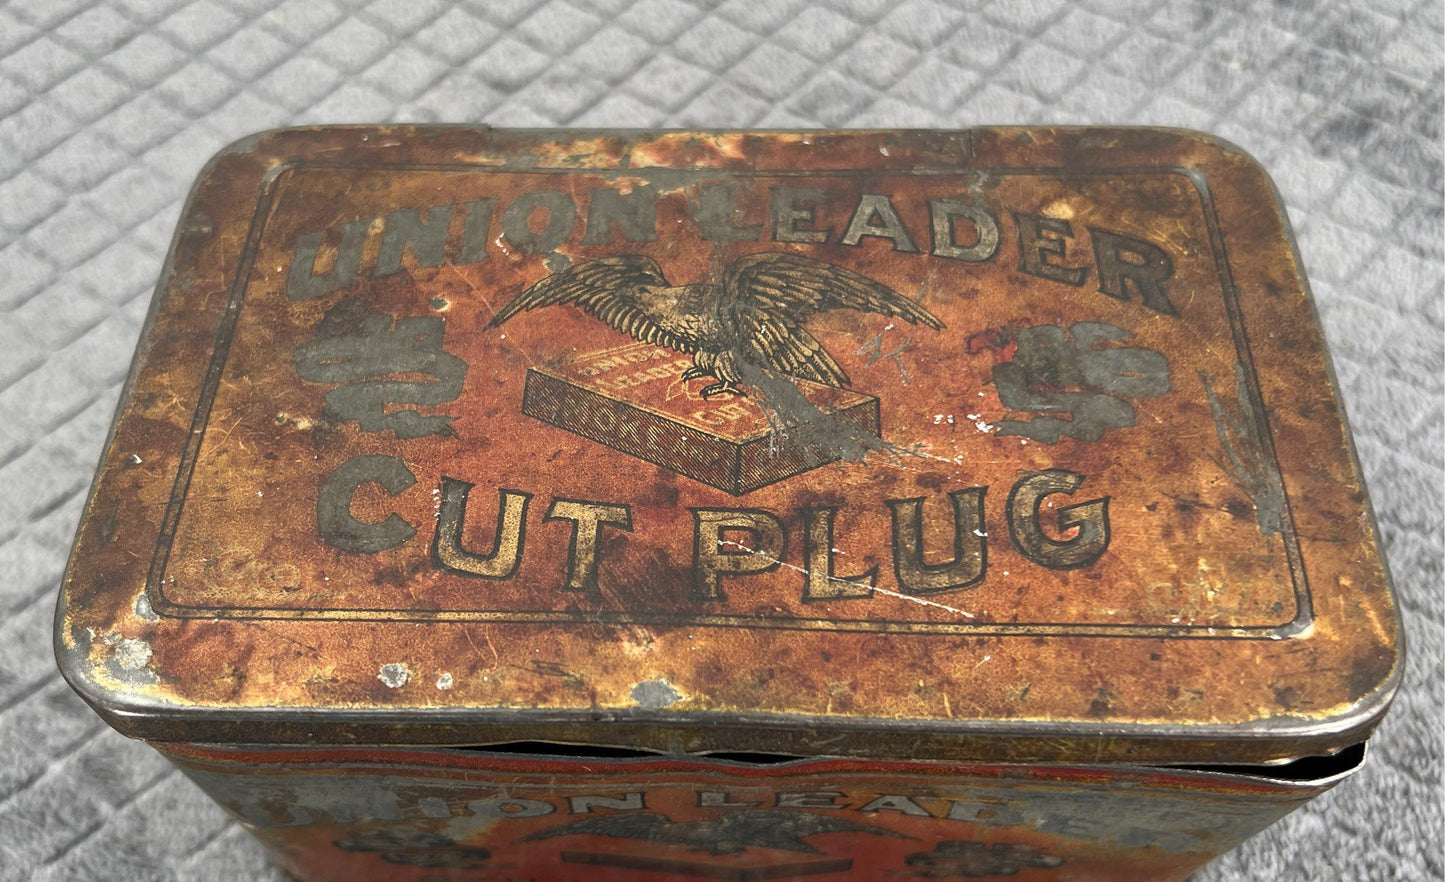 Vintage Union Leader Cut Plug Tobacco Advertising Hinged Tin-Early 20th Century